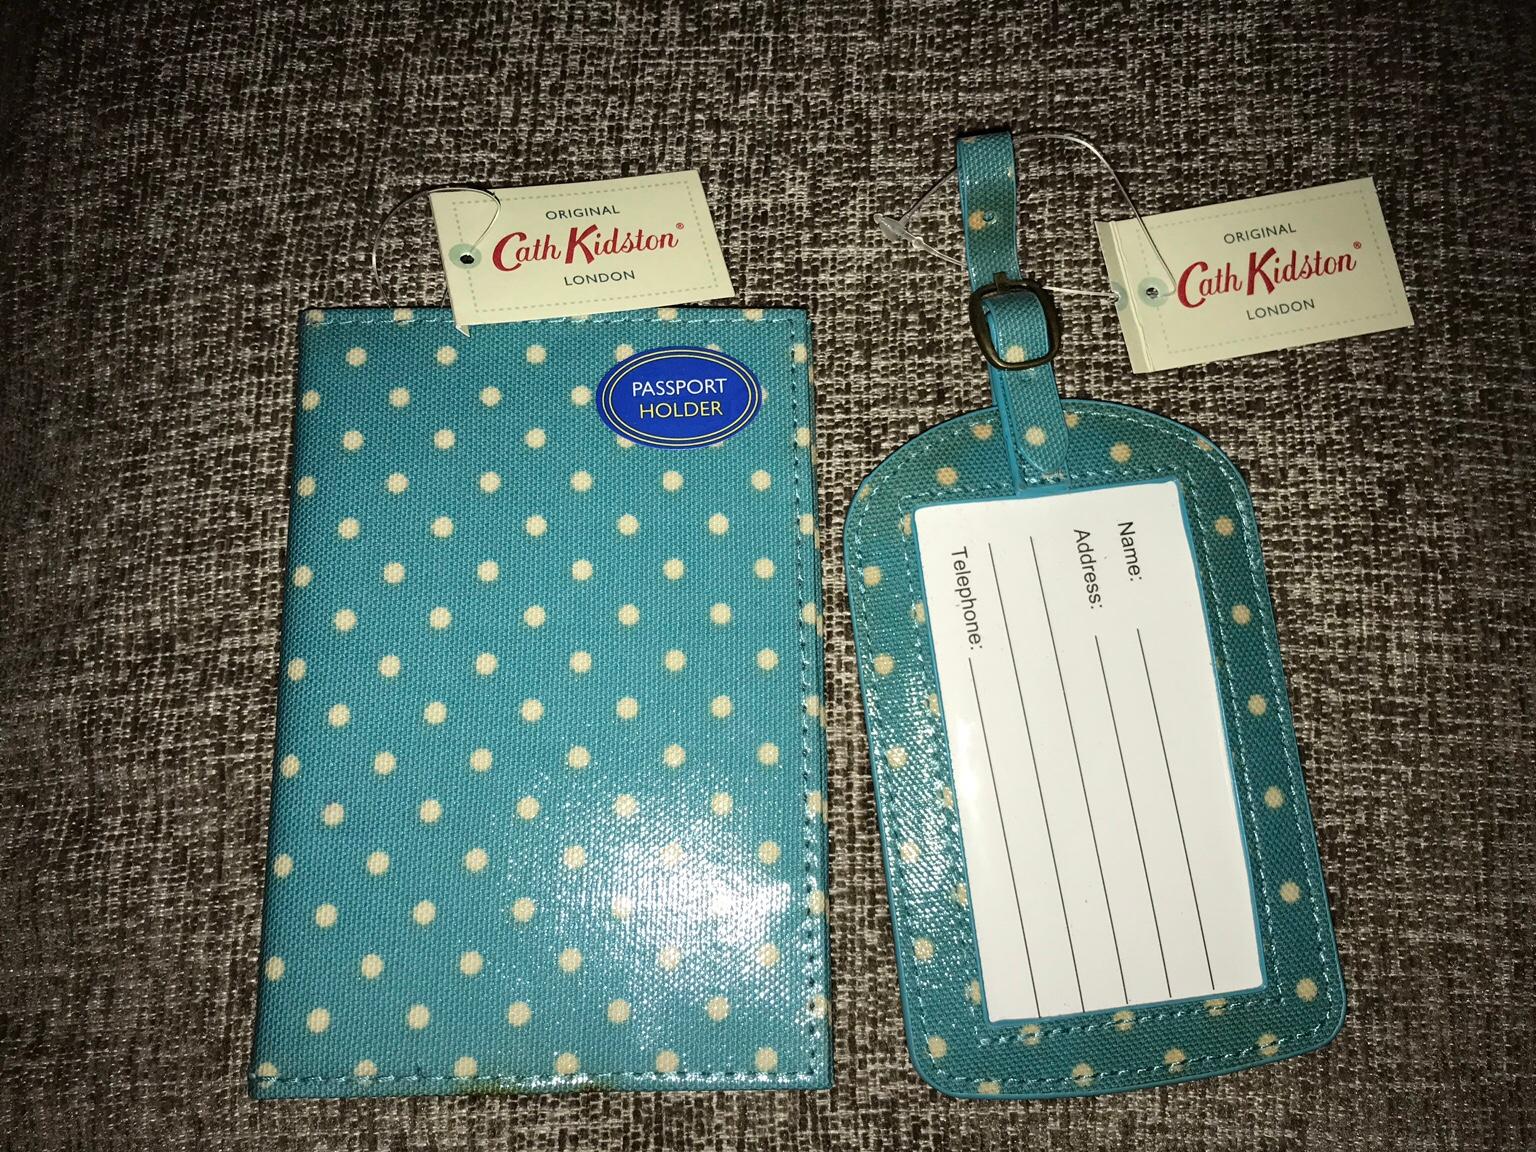 cath kidston passport holder and luggage tag